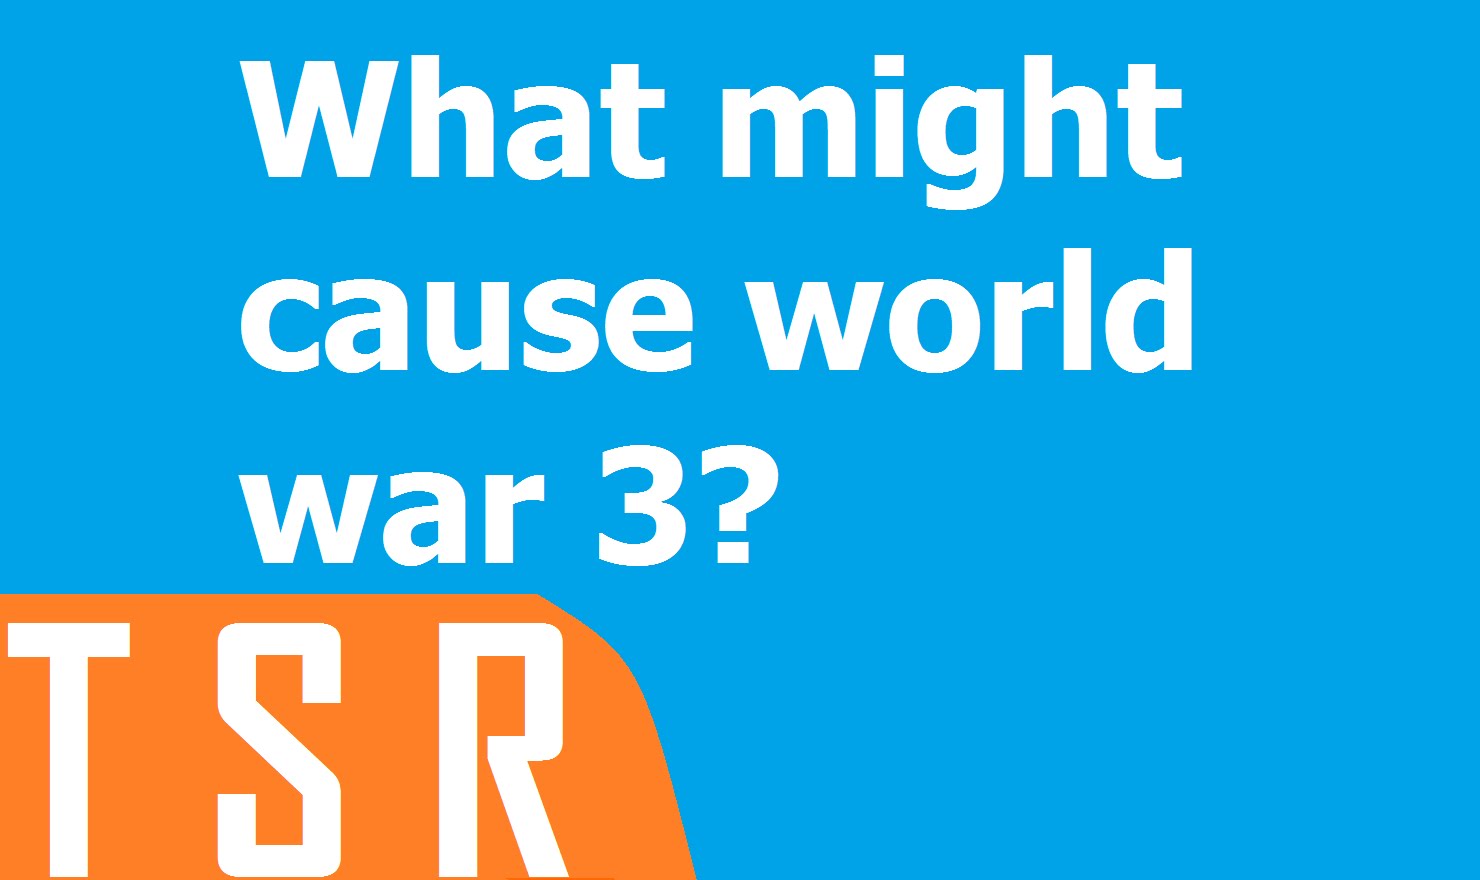 What might cause world war 3